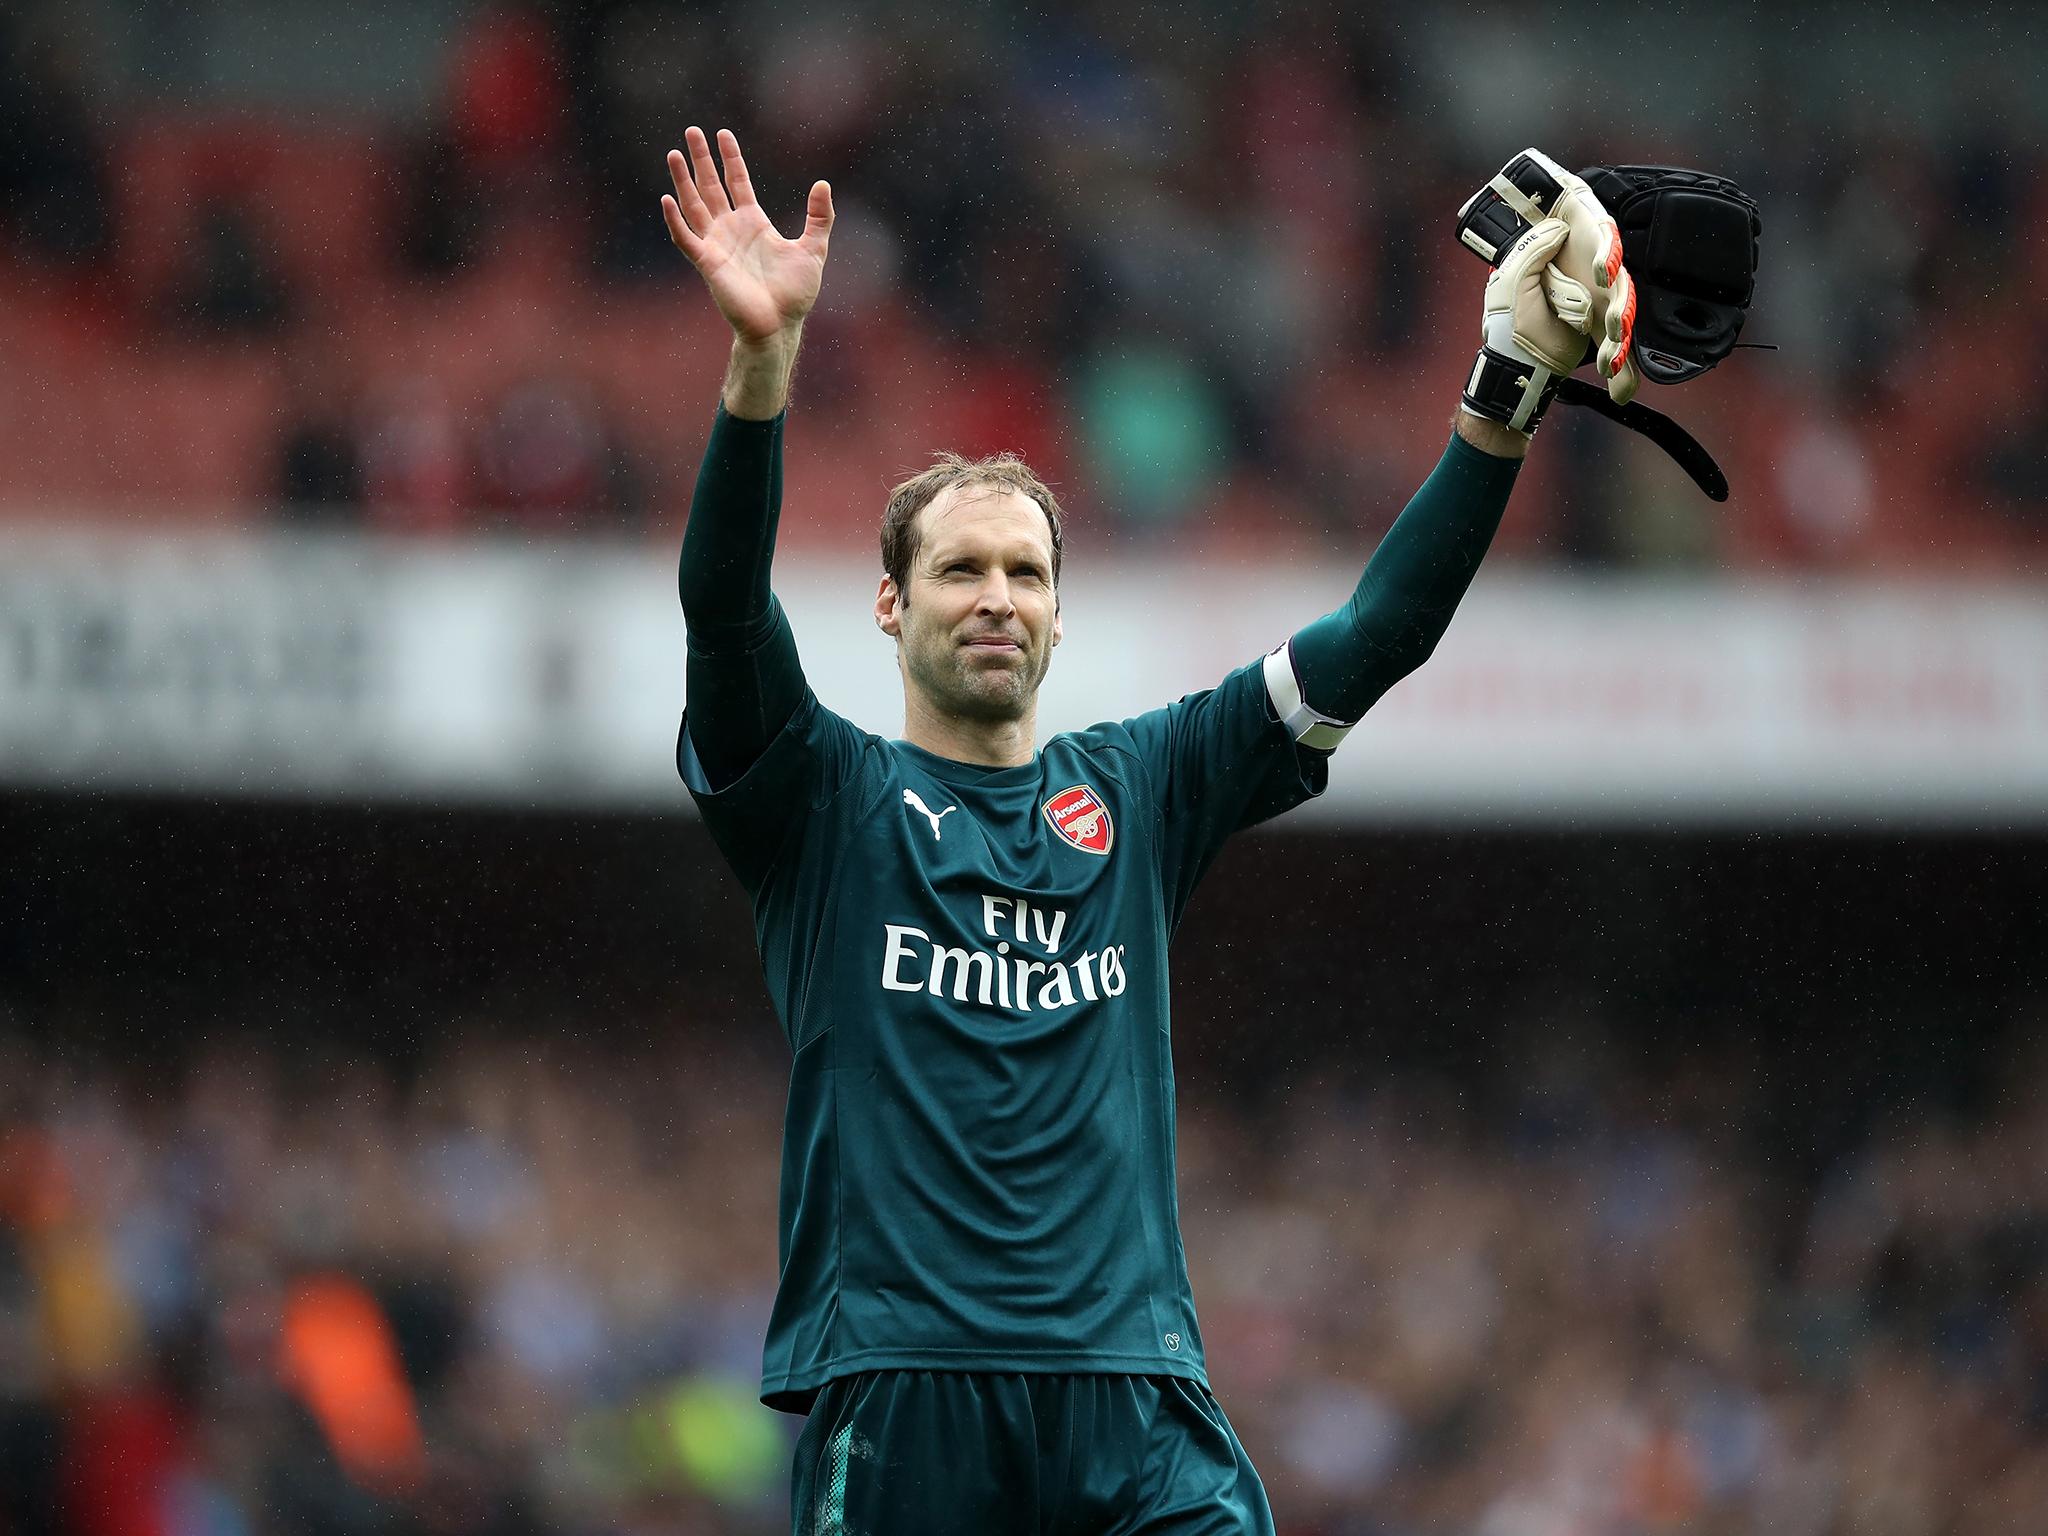 &#13;
Cech believes Tottenham must back their fine form up with a trophy &#13;